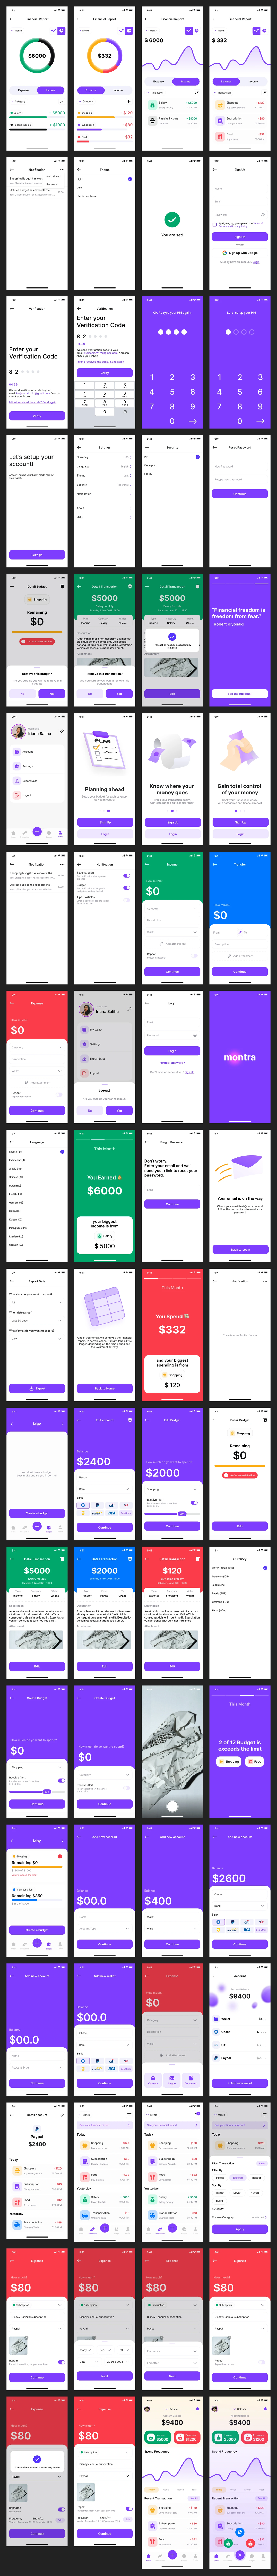 Montra Expense Tracker Free UI Kit for Figma - Clean and clear UI Kit with necessary stuff to create design projects. It’s the simplest way to work with buttons, charts, inputs, and popups with saving huge amount of time.